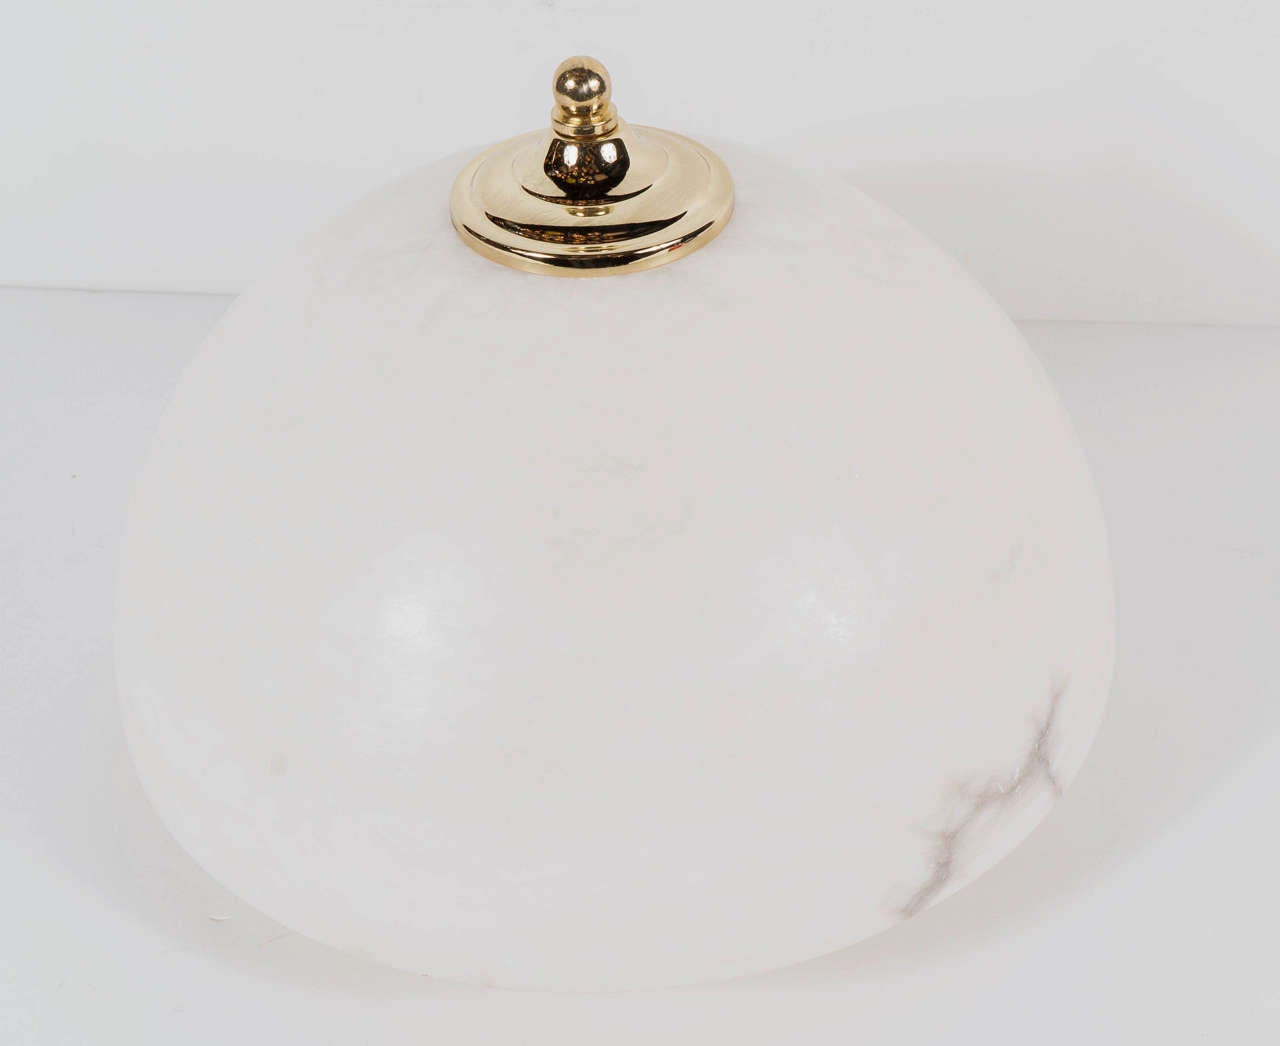 Elegant Art Deco alabaster dome flush mount with brass fittings tipped with a brass ball detail. The alabaster is fairly consistent throughout with light veining which is enhanced when lit. This piece has been newly rewired and takes three